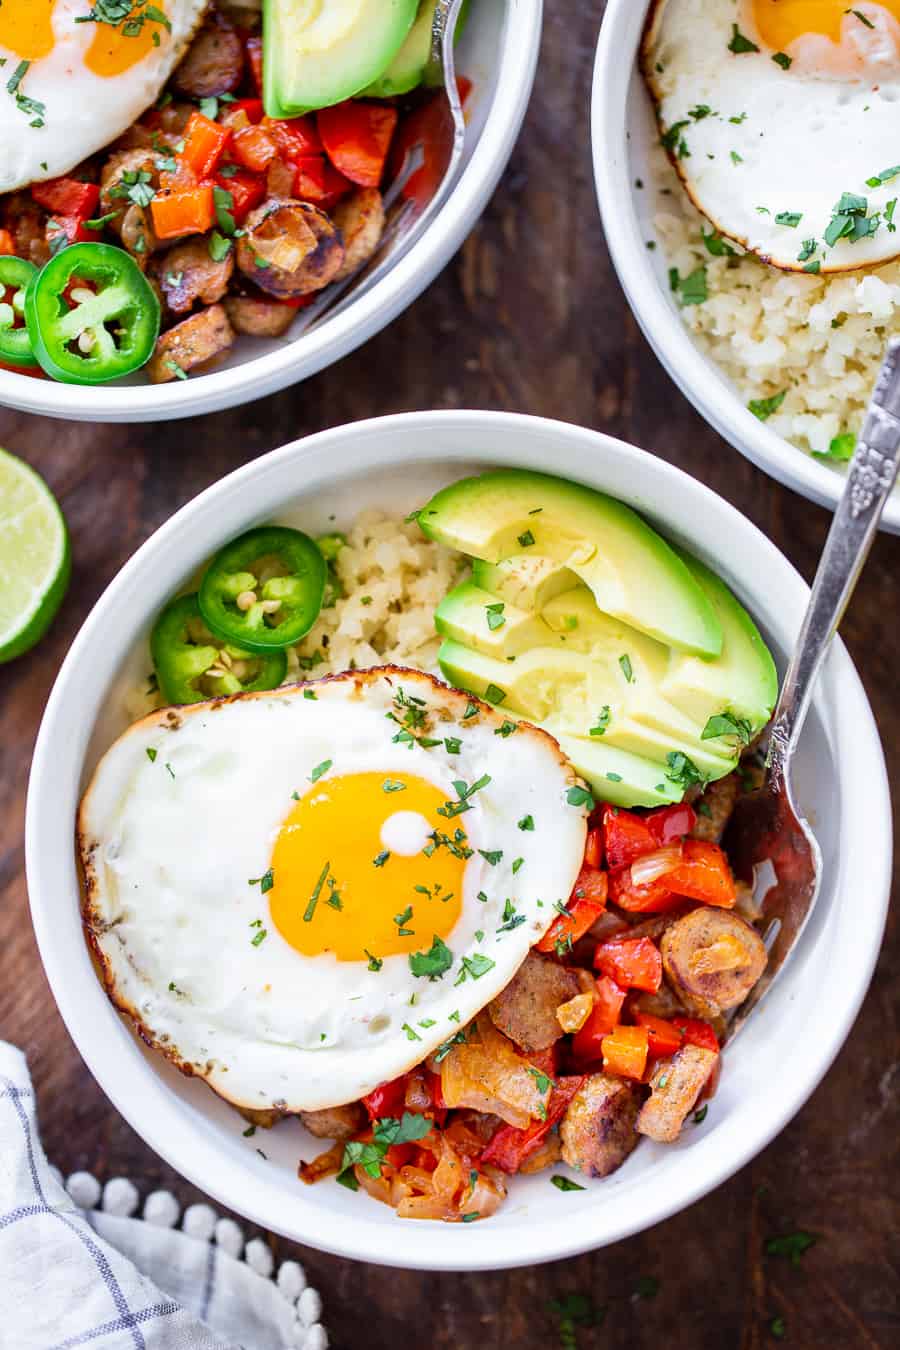 These Paleo breakfast burrito bowls are loaded with goodies!  Savory No Antibiotics Ever All Natural Golden Brown Chicken Sausage, peppers, onions, and seasoned cauliflower rice topped with sliced avocado and eggs. These delicious breakfast bowls are low carb, Whole30 compliant and super easy to throw together!